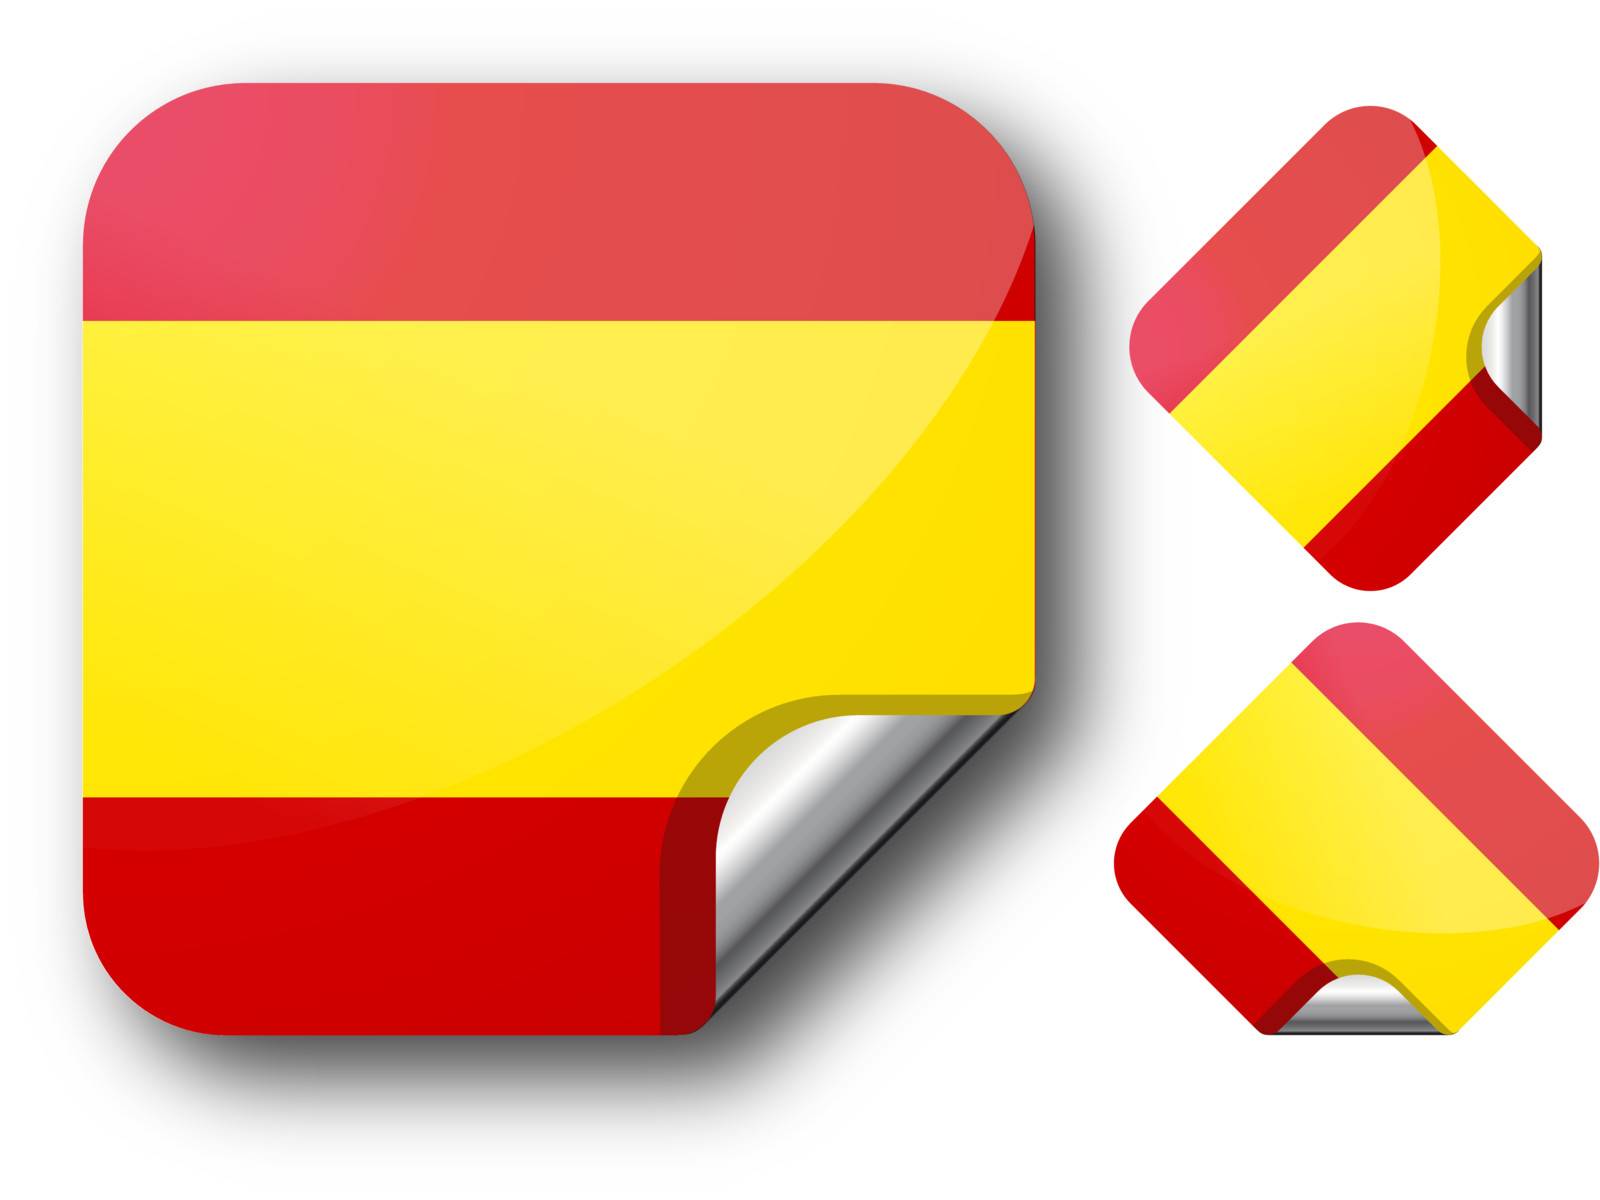 Sticker with Spain flag by SolanD